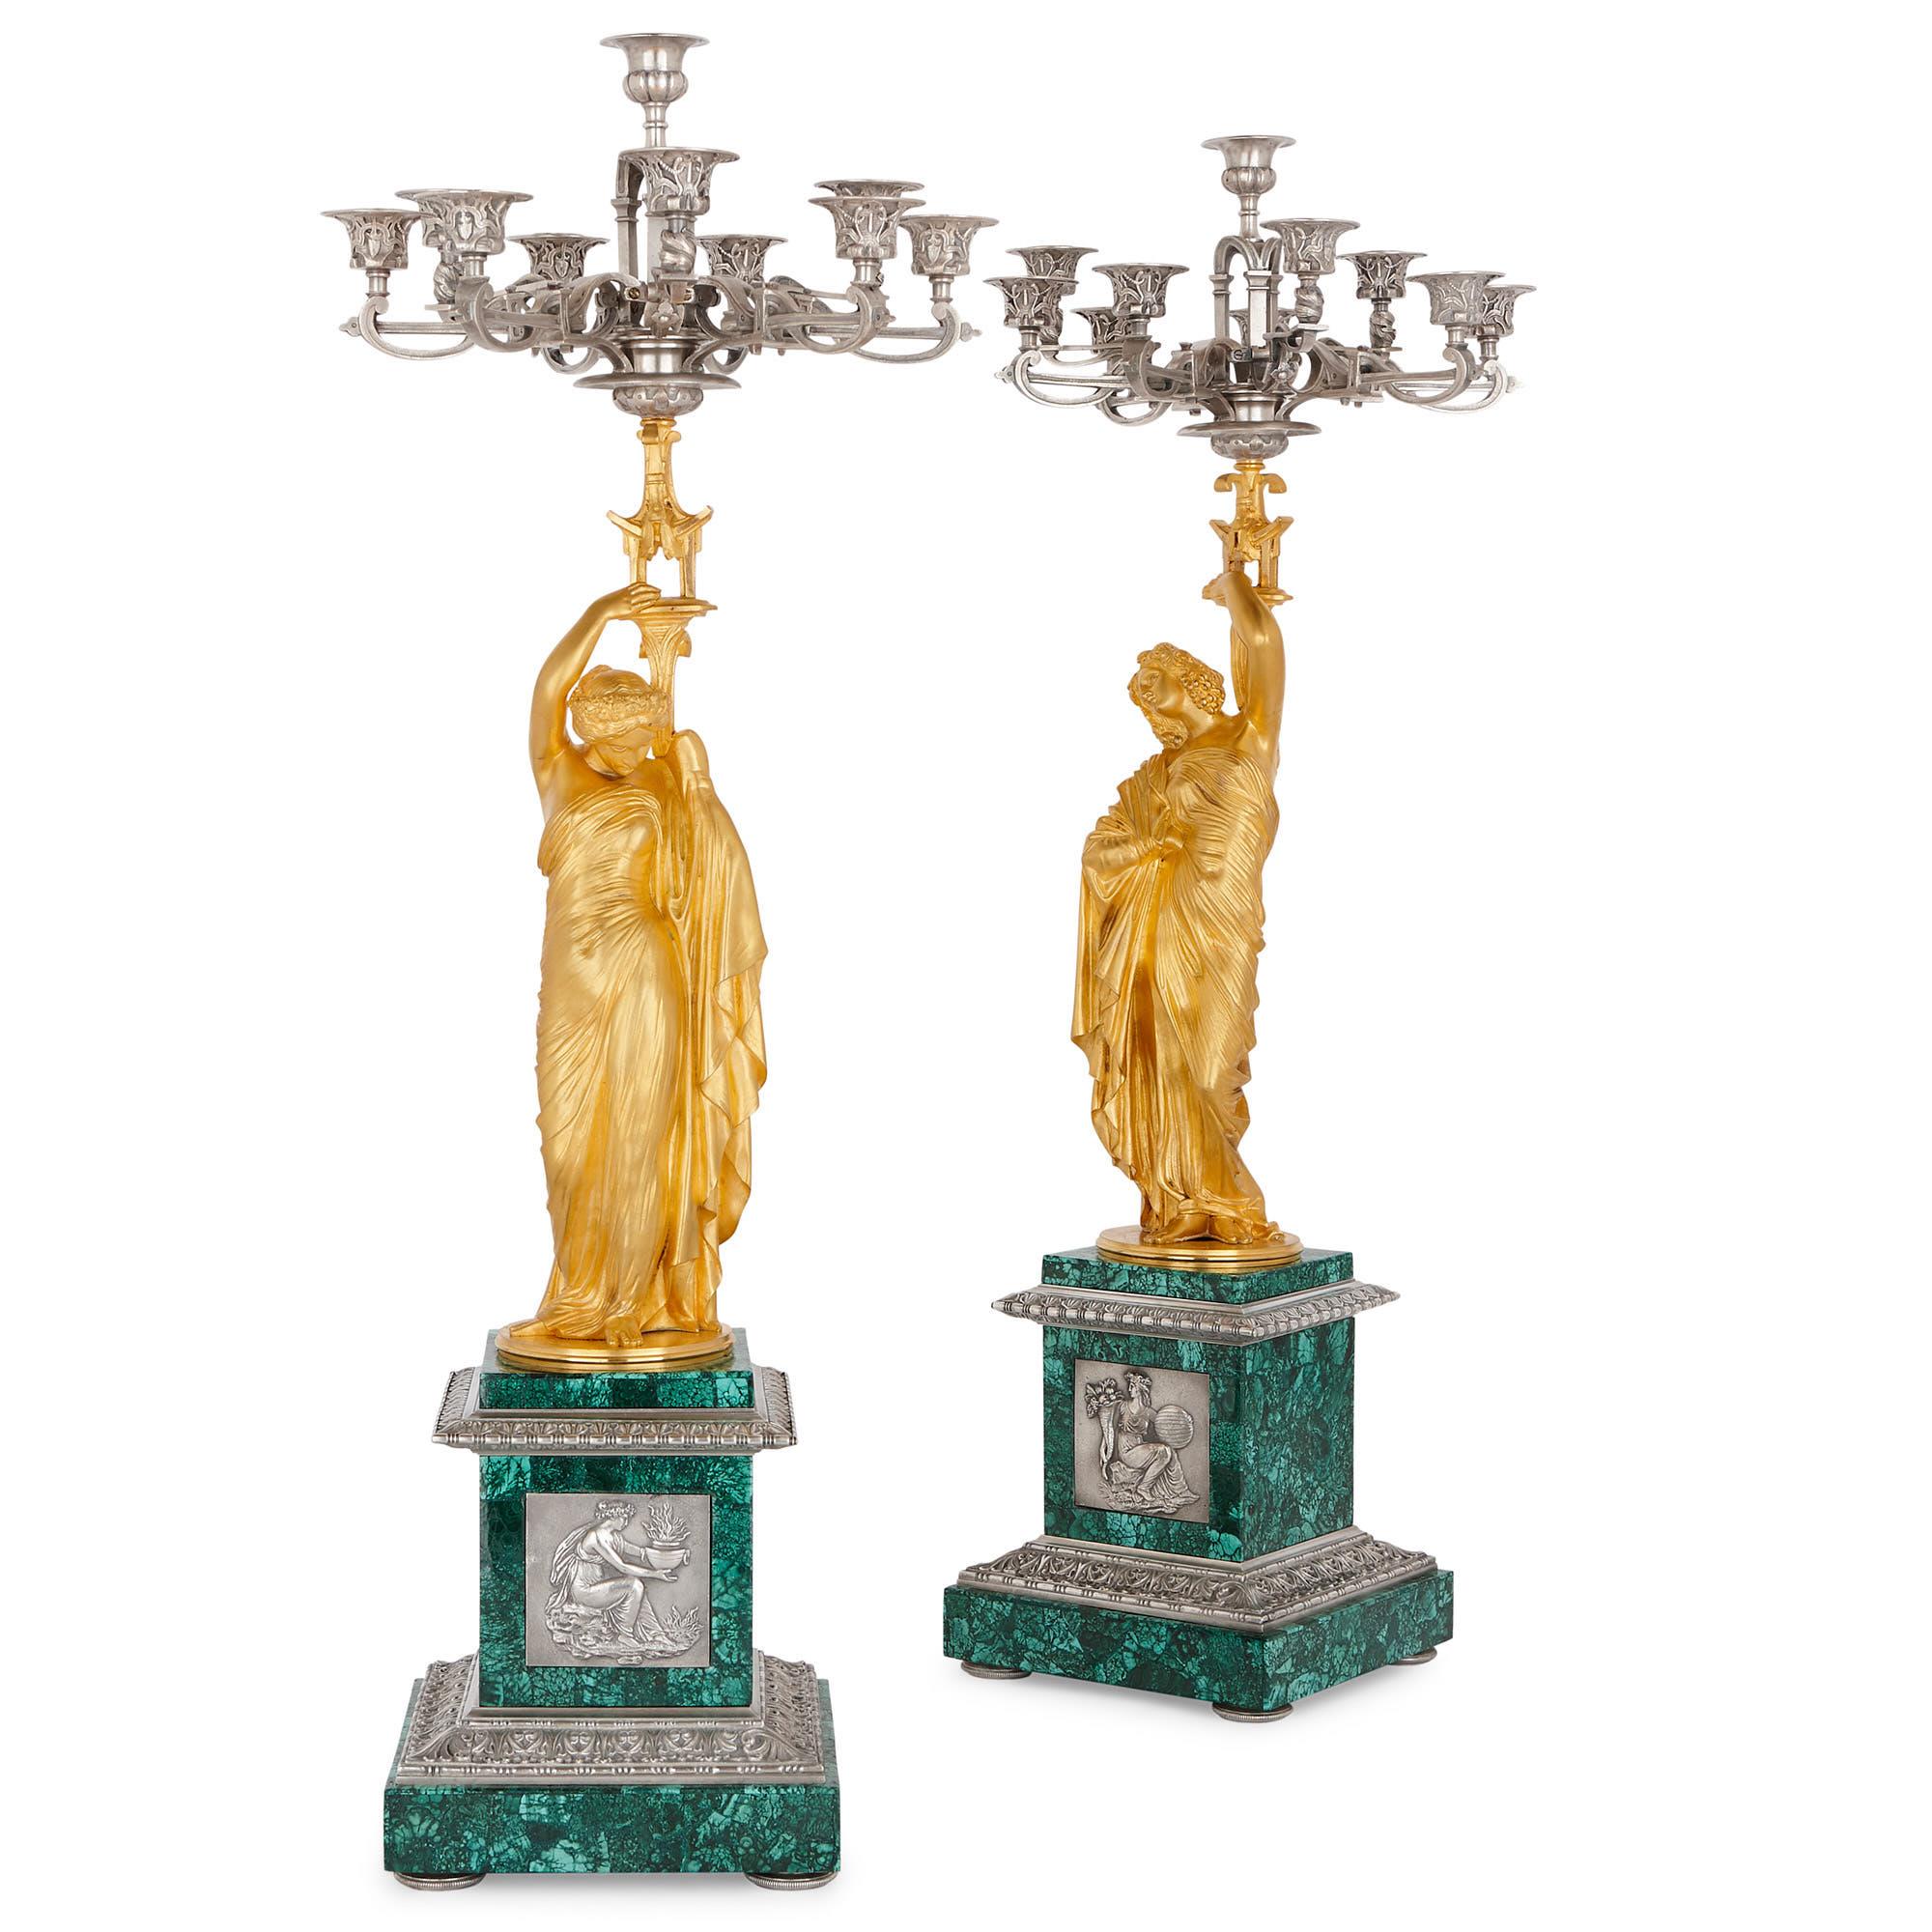 This spectacular clock set is based on the works of the esteemed Neoclassical artist James Pradier (French, 1790-1852), whose sculptures can be found in nearly all of Paris's major museums and landmarks. Pradier designed all the bronze figures and